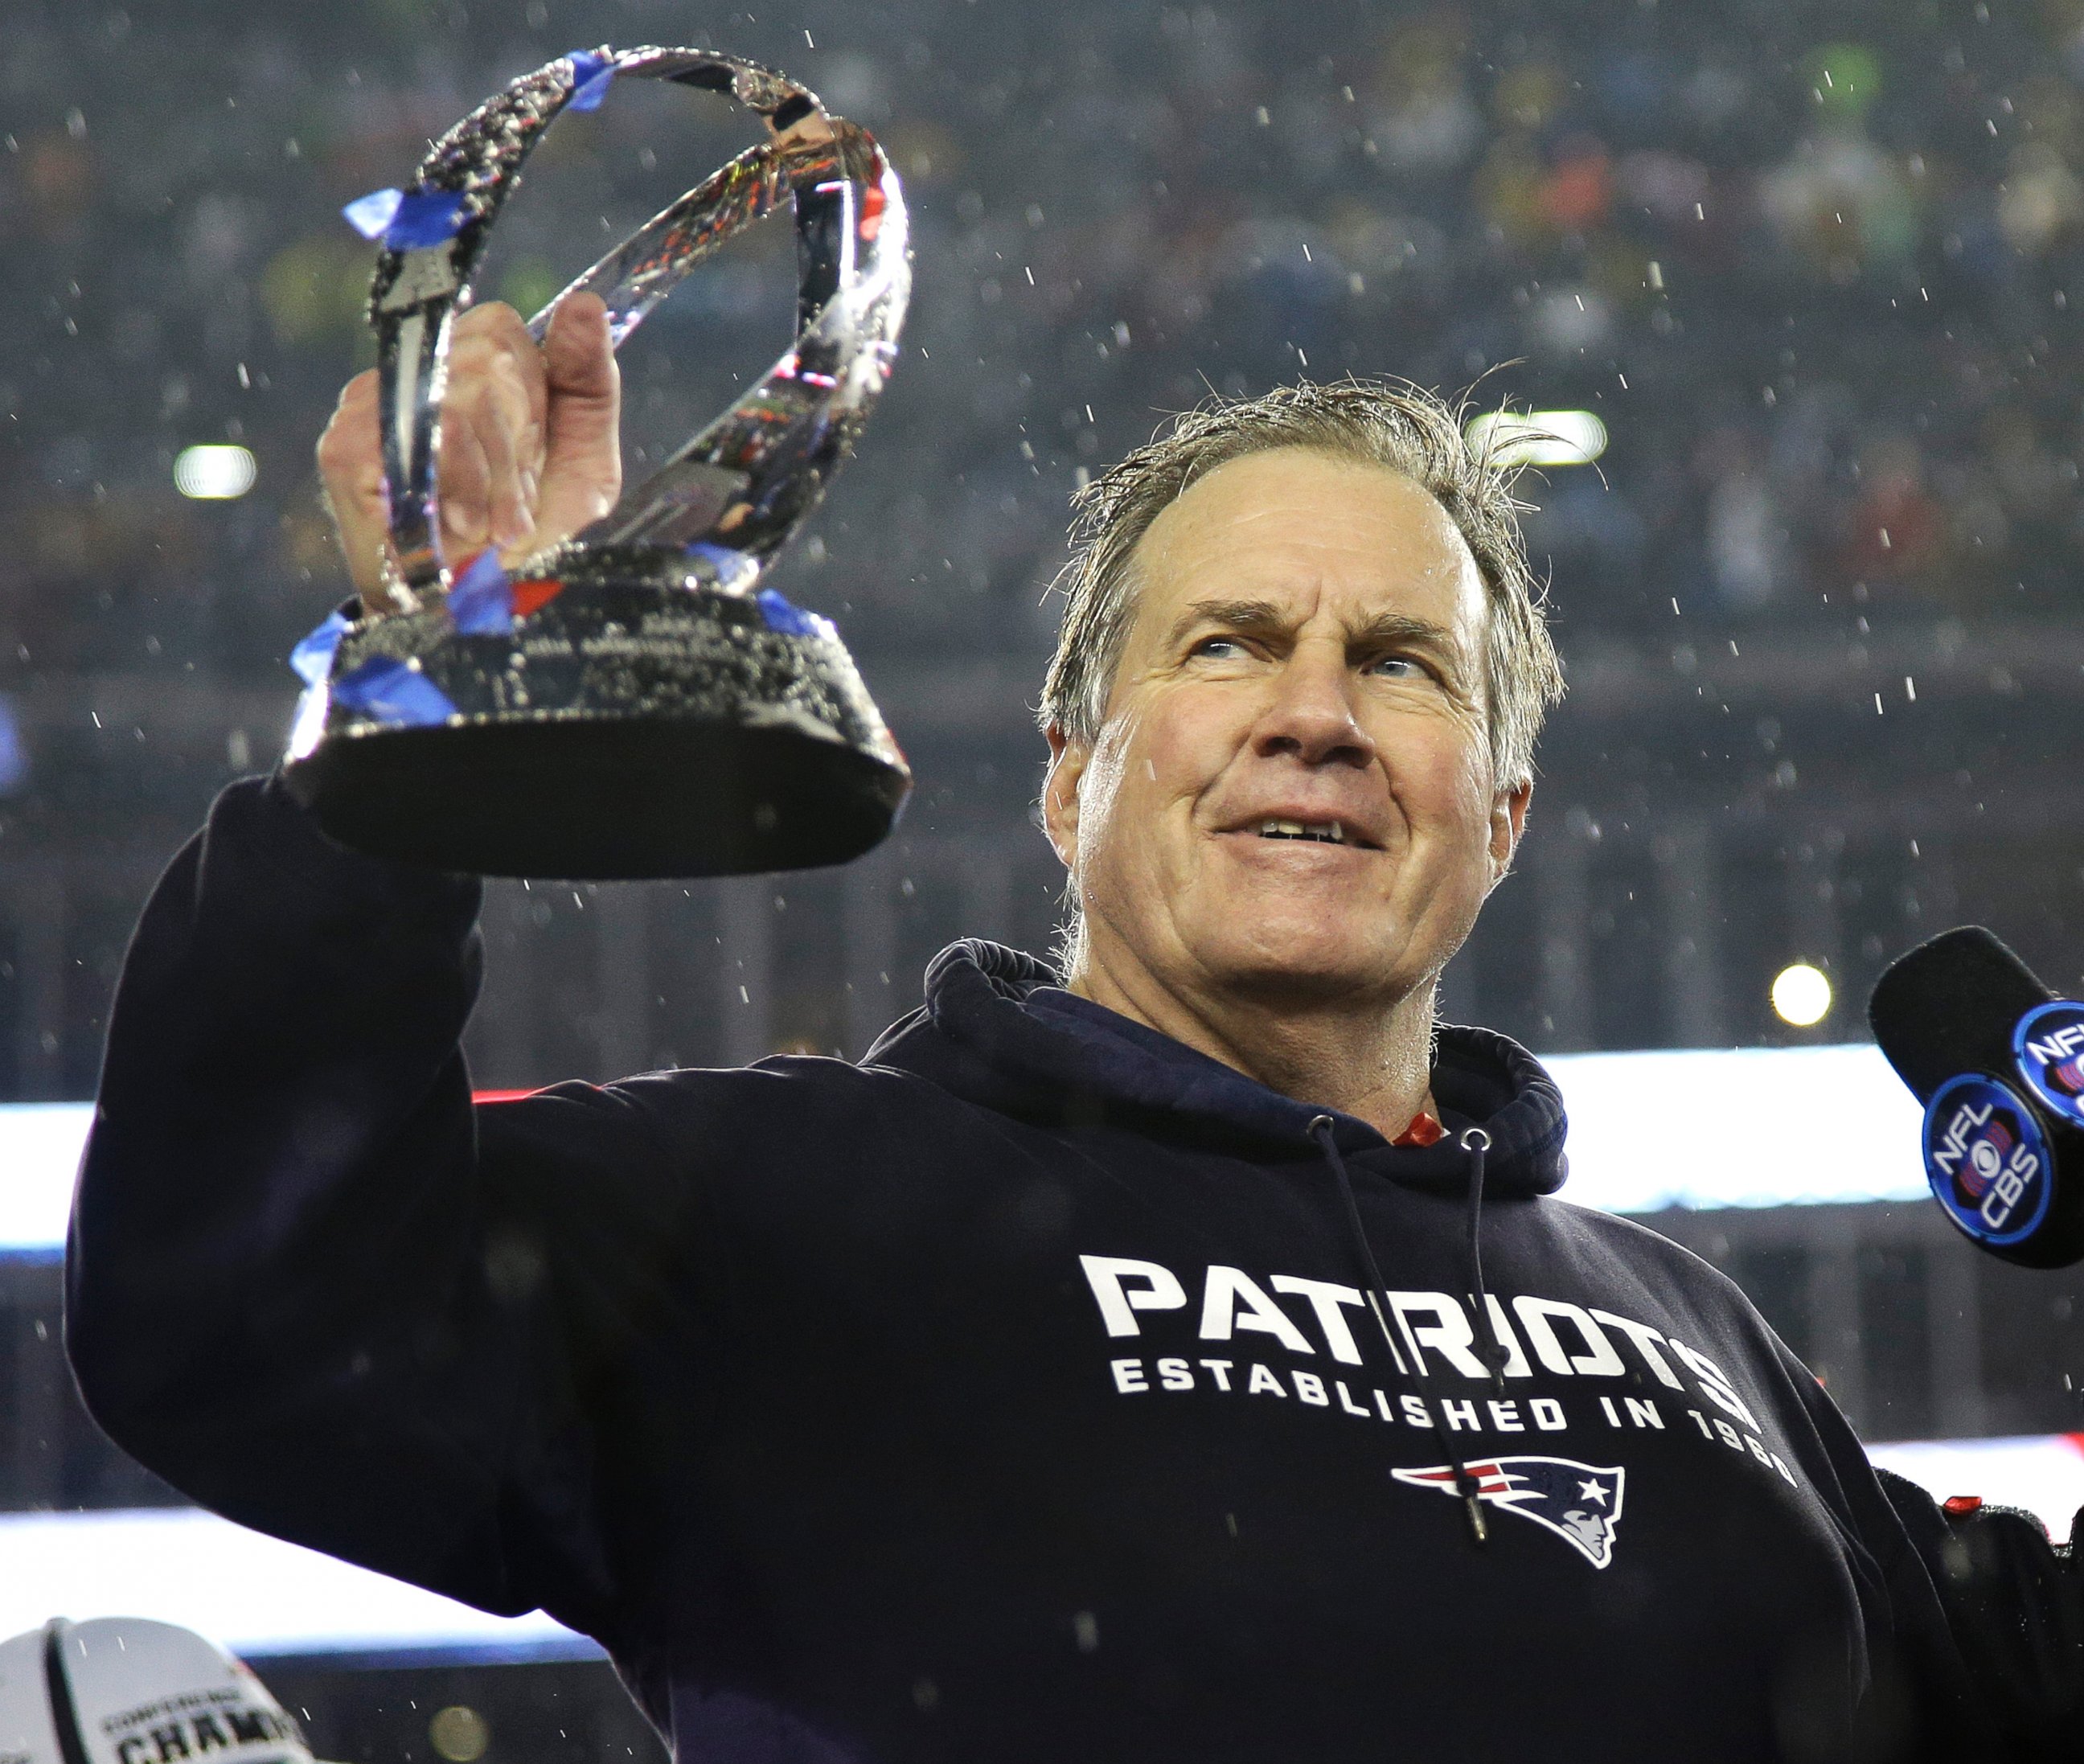 PHOTO: New England Patriots head coach Bill Belichick holds the championship trophy after the NFL football AFC Championship game on Jan. 18, 2015, in Foxborough, Mass.